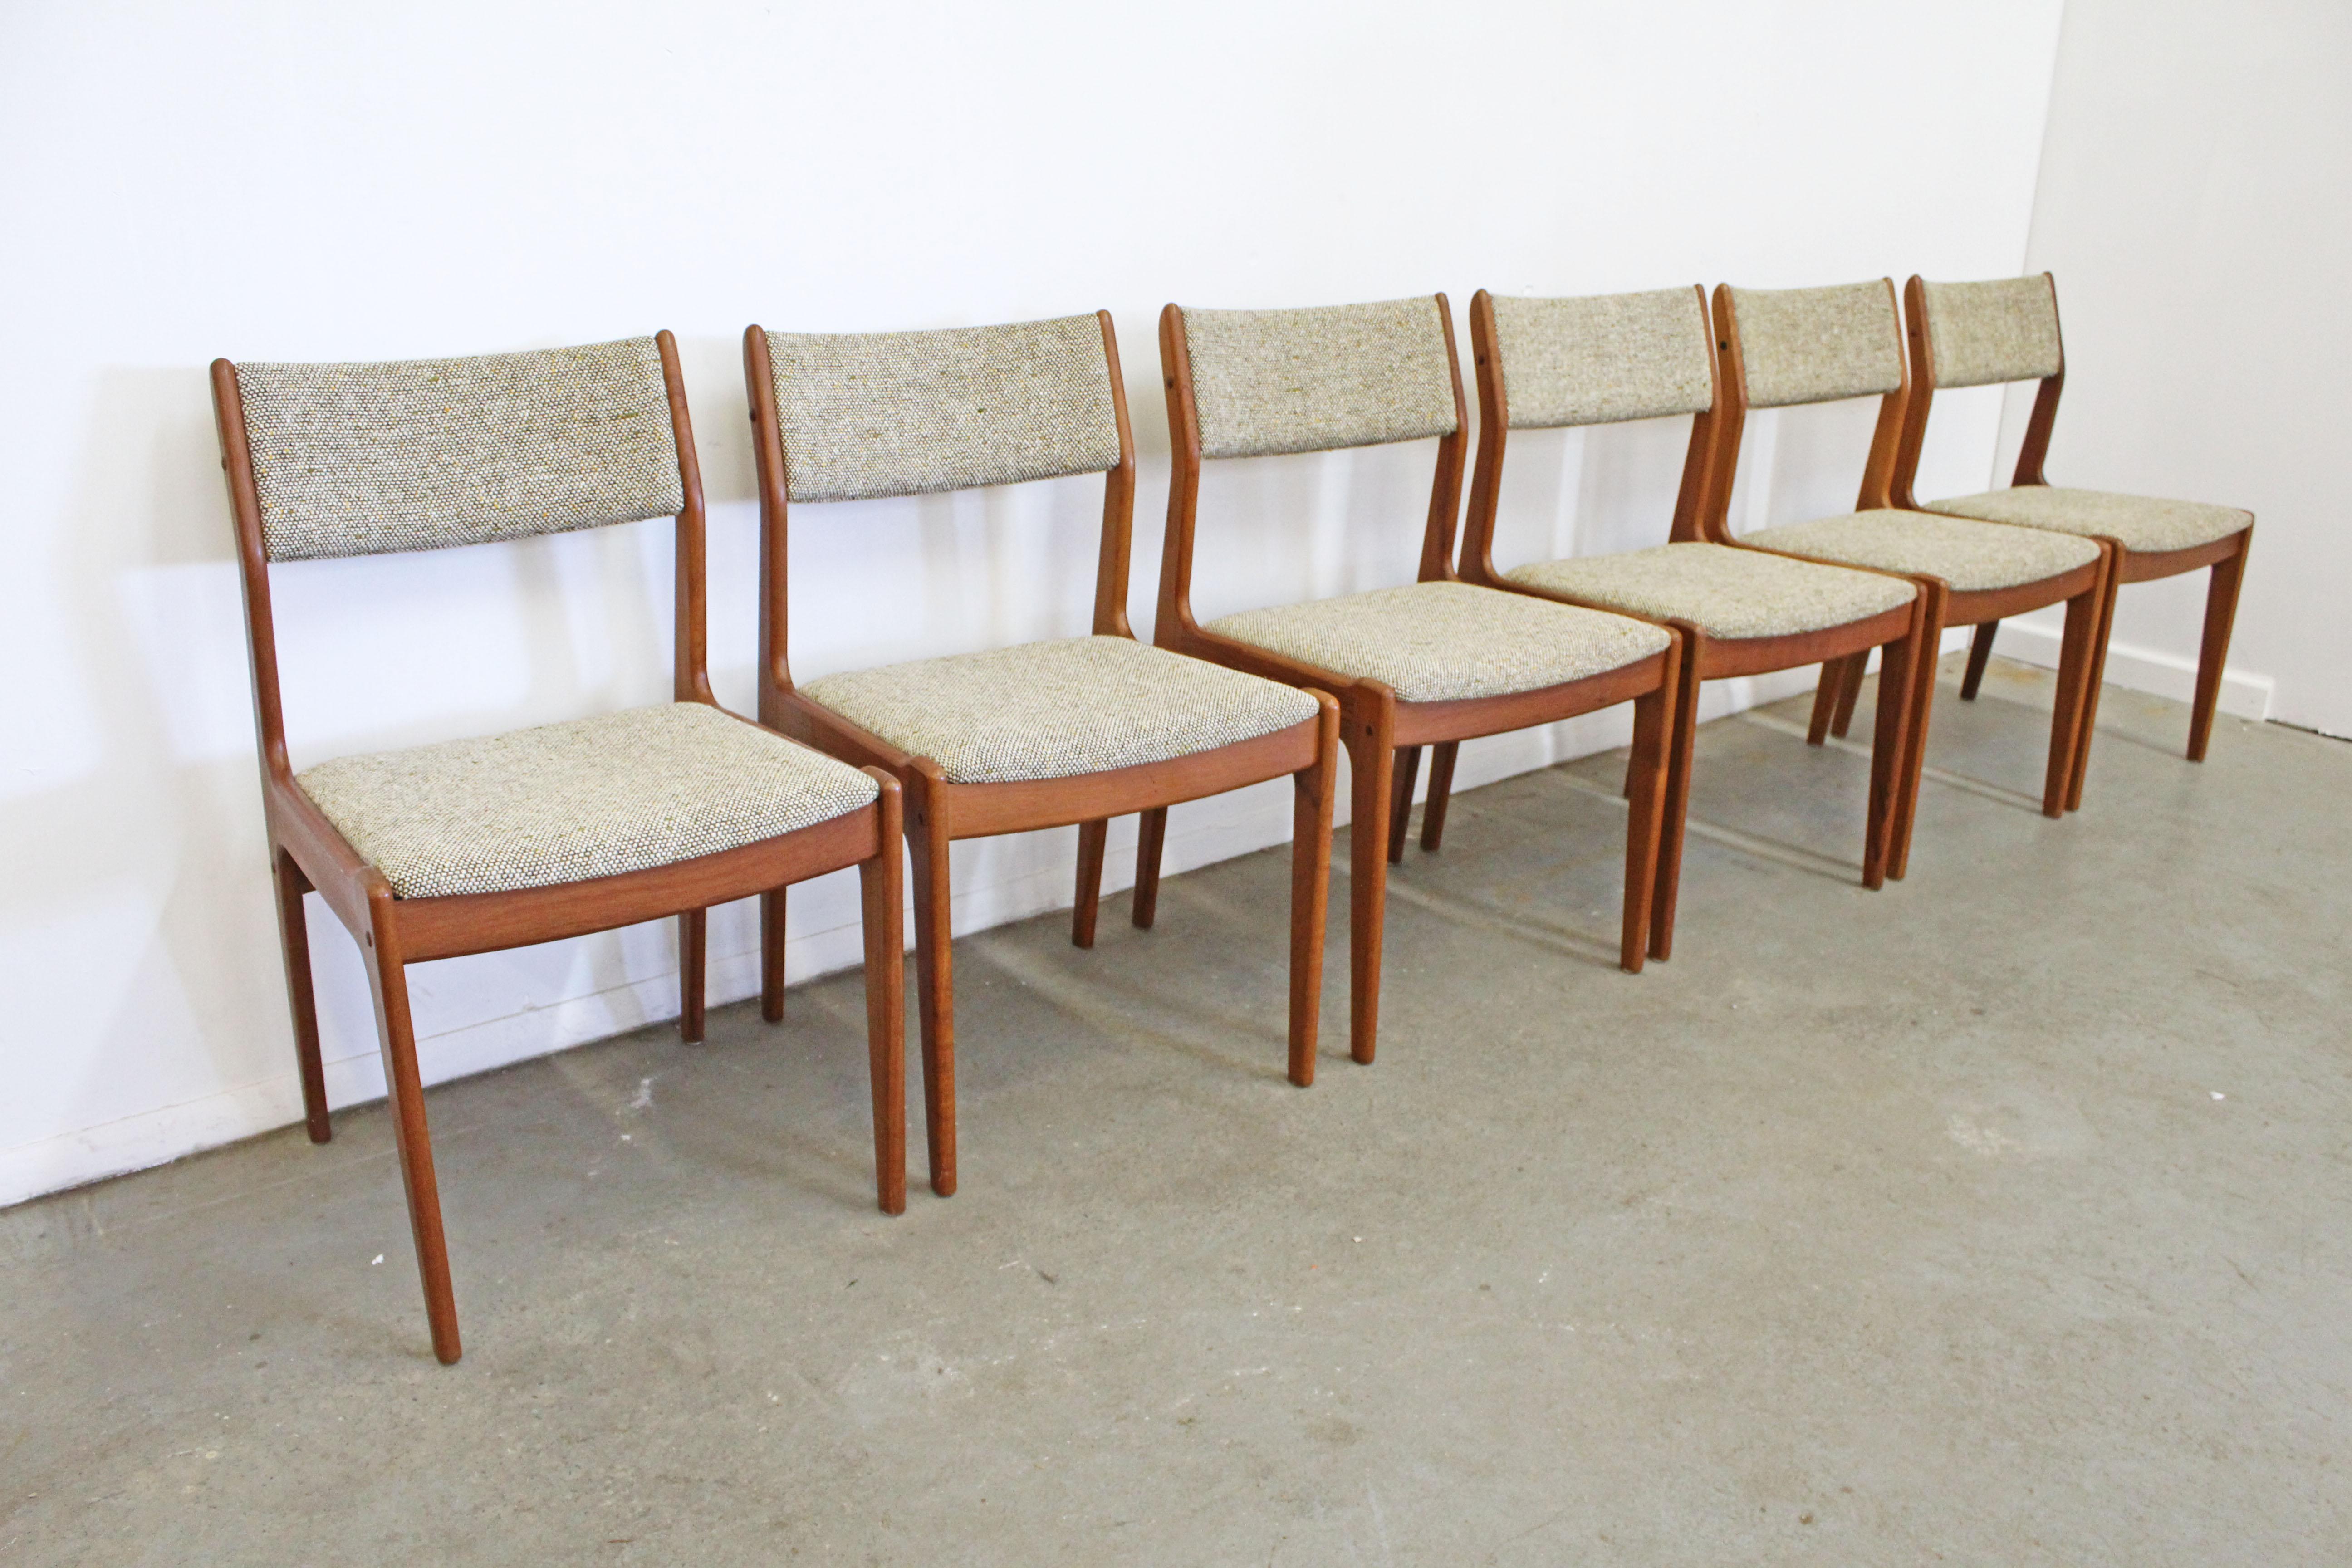 What a find. Offered is a set of 6 teak dining chairs. They are in decent condition, show some age wear (surface scratches on wood, age wear- see photos). They are structurally sound and are signed by Scandinavian Woodworks Inc. 

Approximate